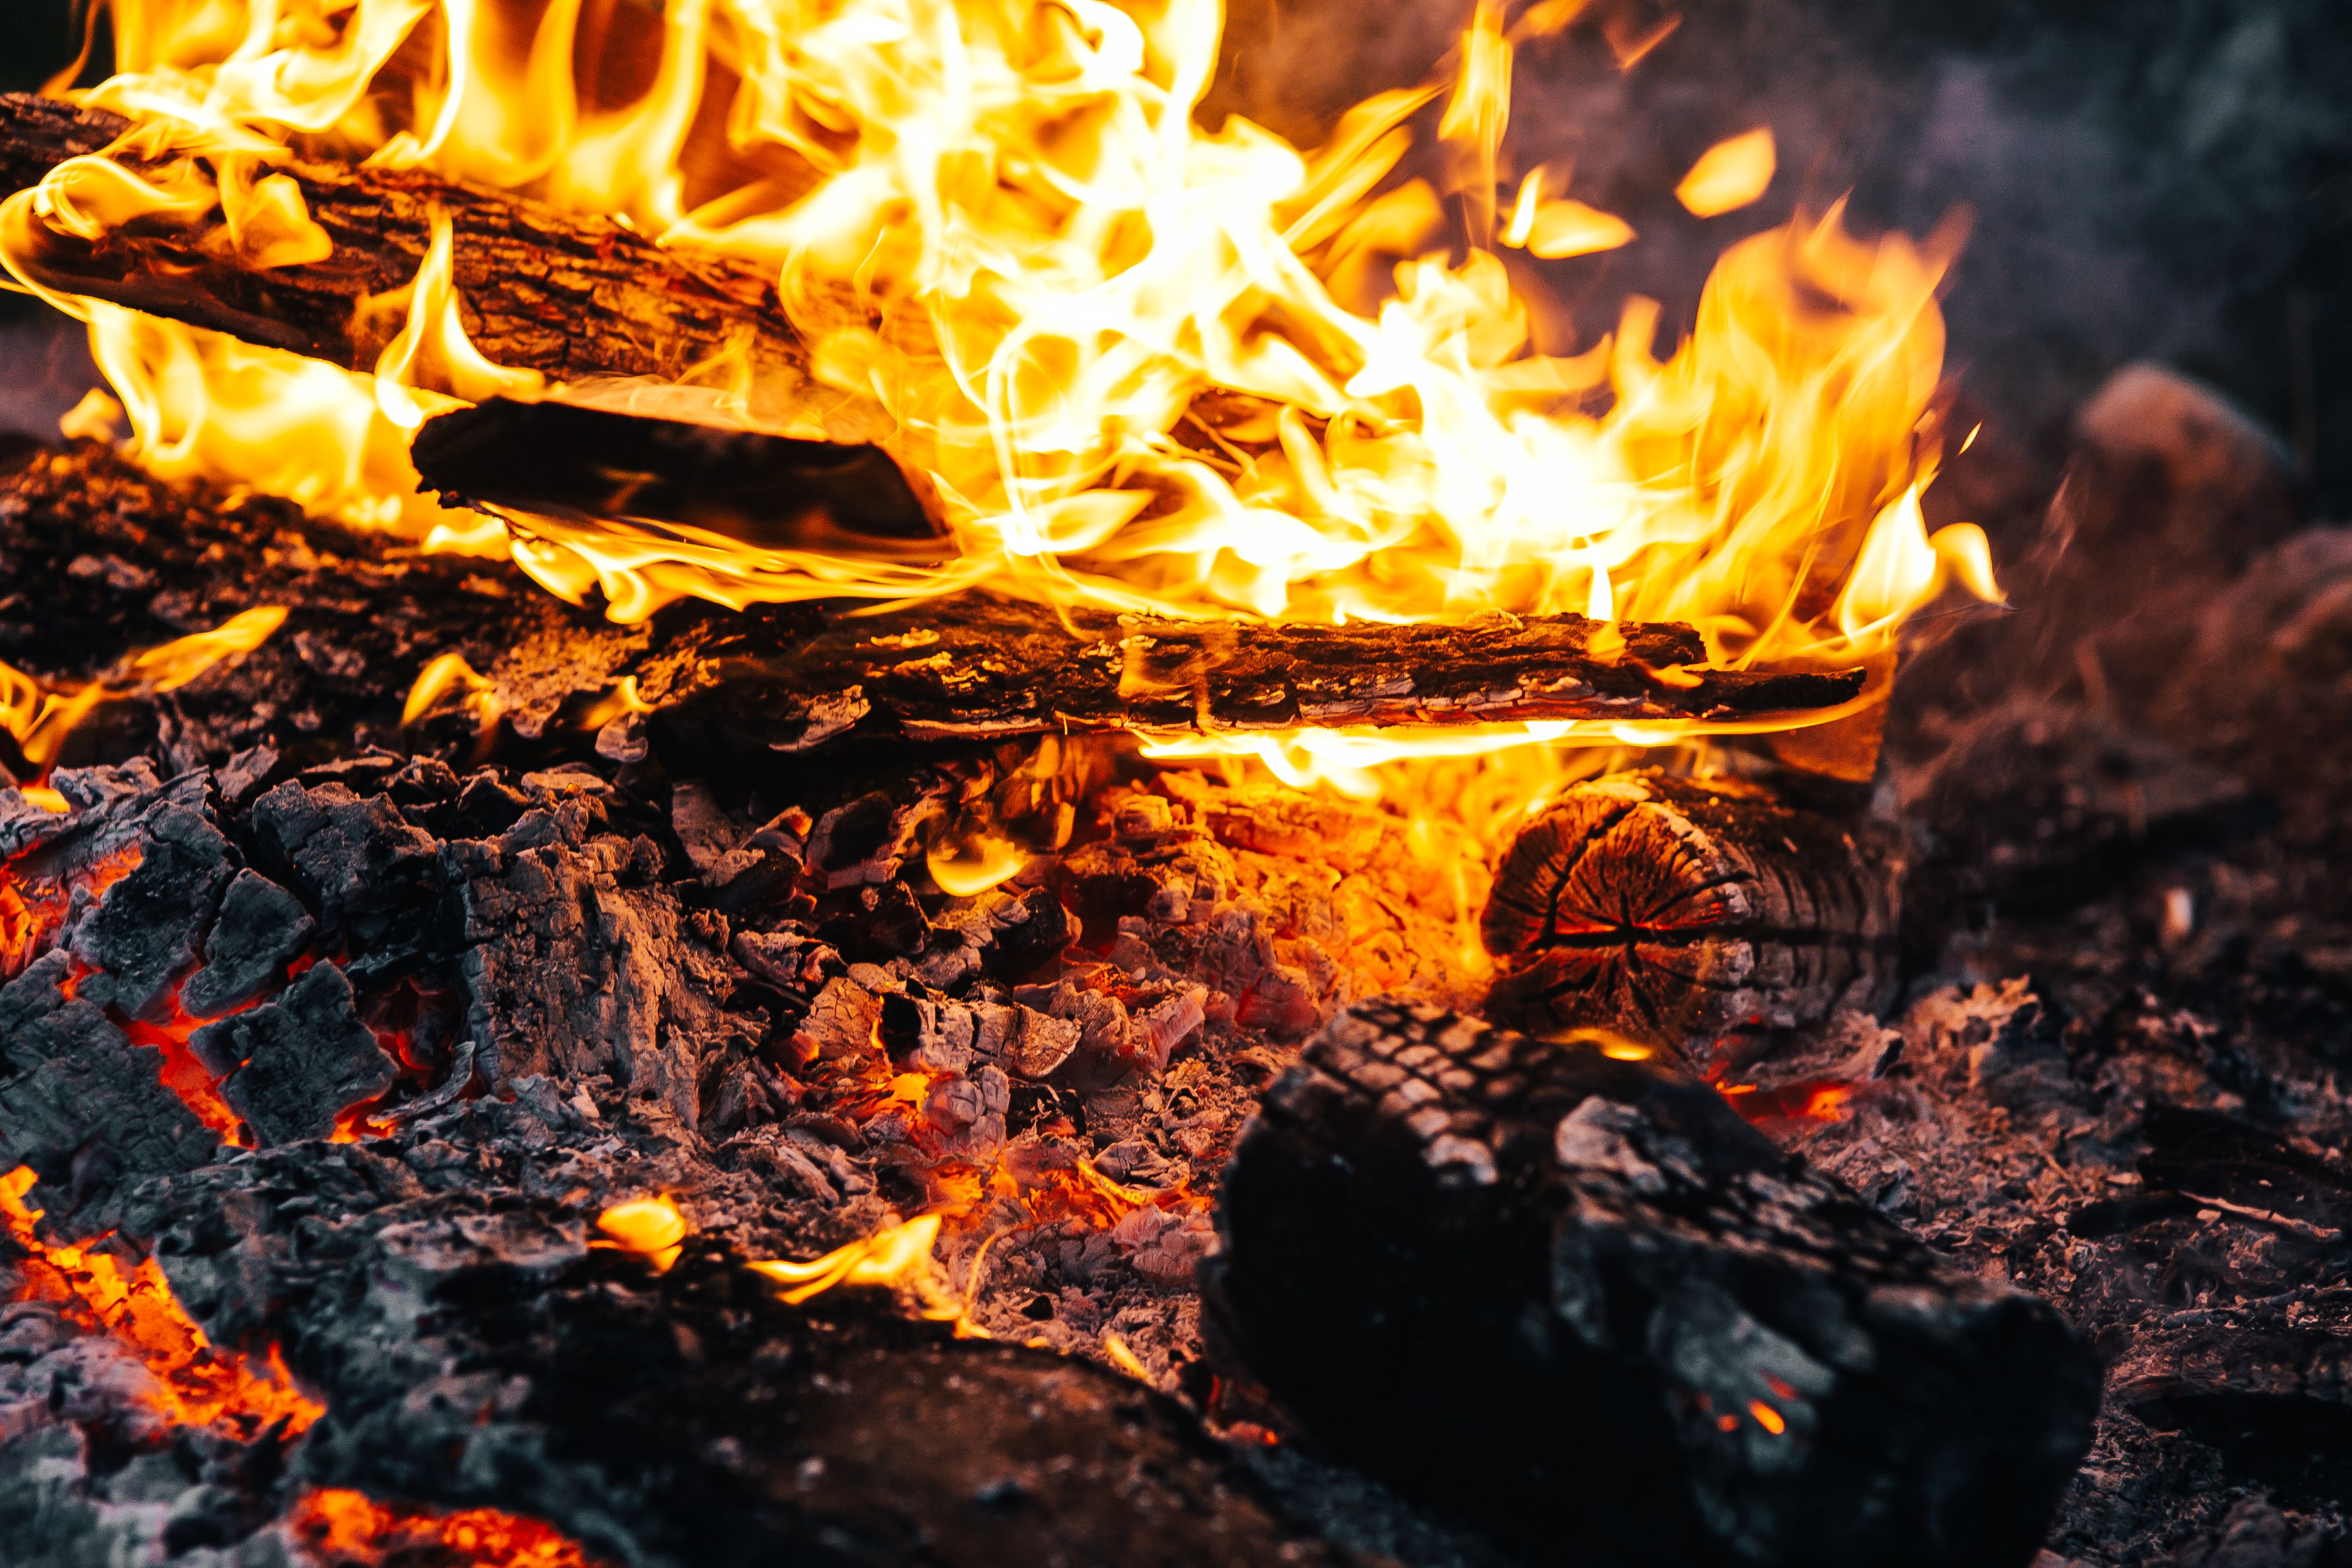 90045 download wallpaper fire, bonfire, coals, flame, miscellanea, miscellaneous, firewood, ash screensavers and pictures for free